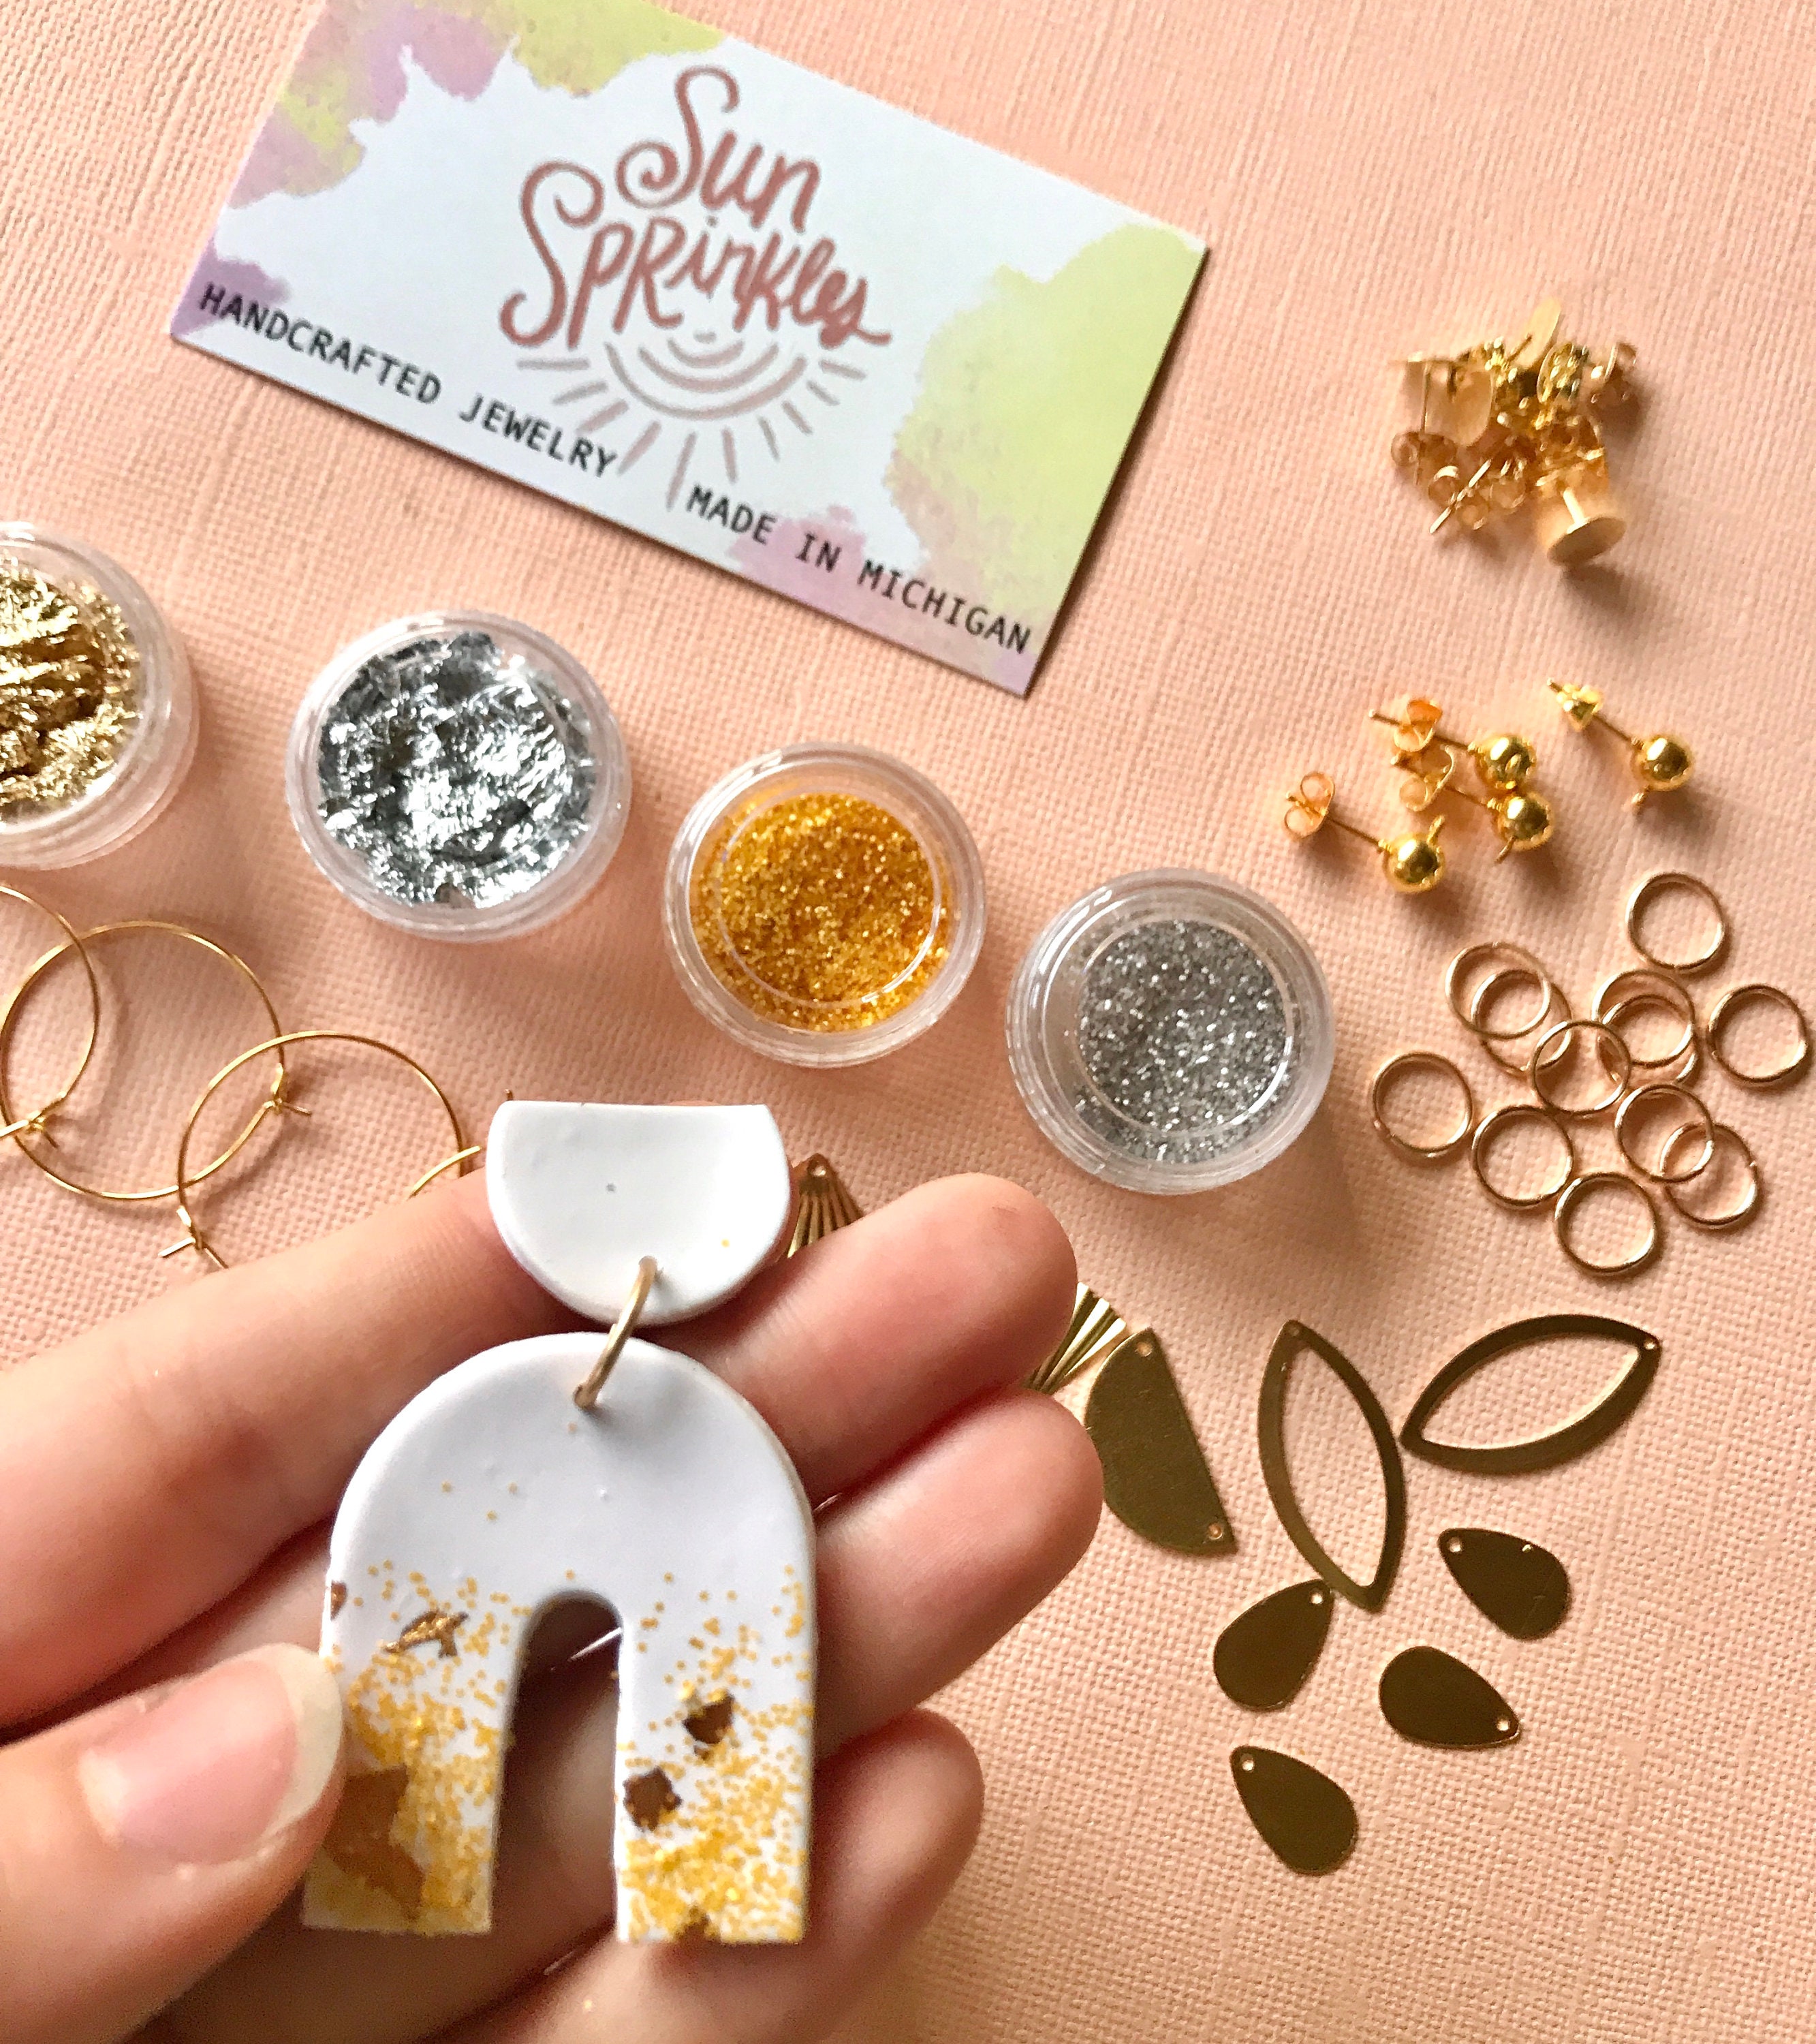 Advanced Sparkle Version DIY Clay Earrings Kit/sun Sprinkles Kit/ Jewelry  Kit/ Make Your Own Polymer Clay Earrings/gift Box Crafting Kit -   Denmark